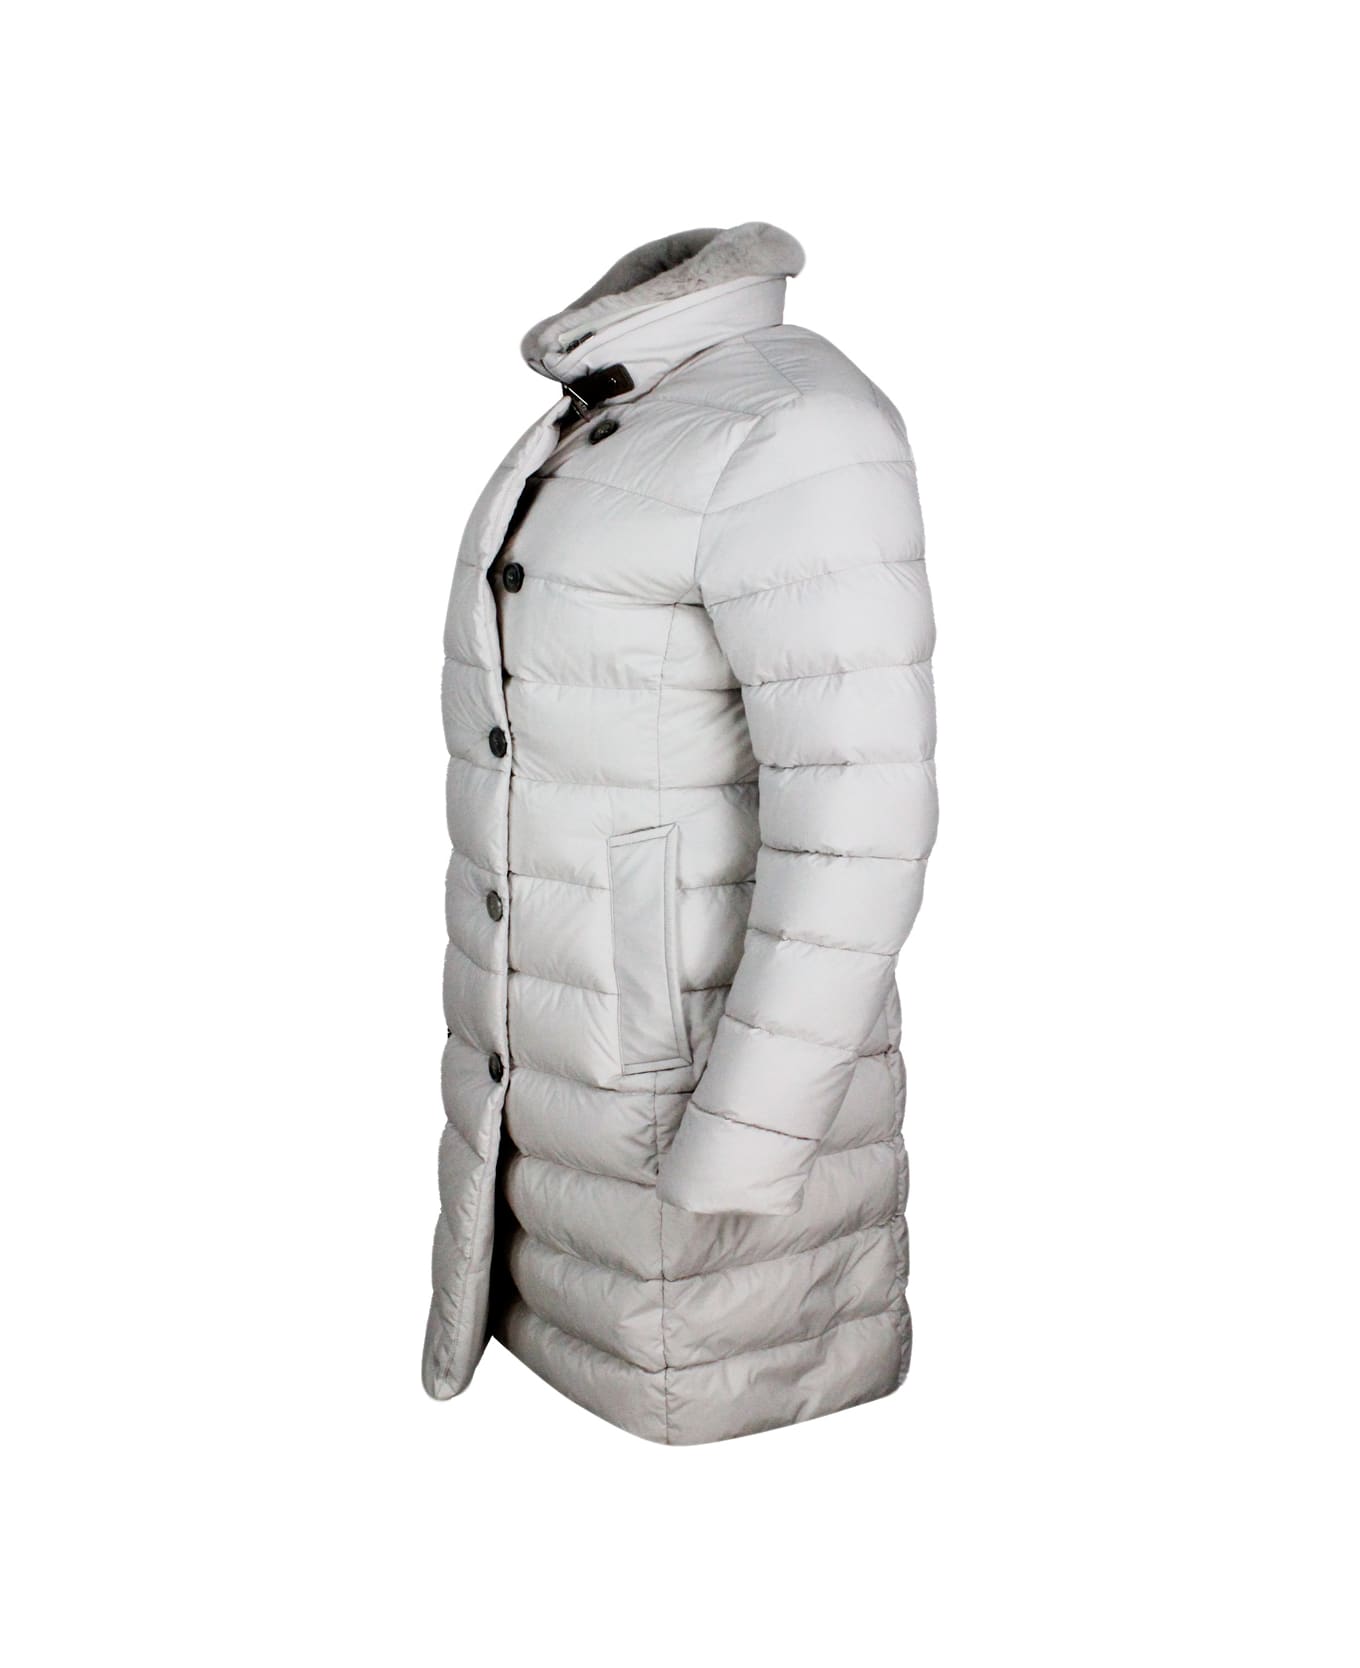 Moorer Long Double-breasted Down Jacket With A Feminine Line Padded With Real Goose Down With Detachable Fur Collar - Ivory